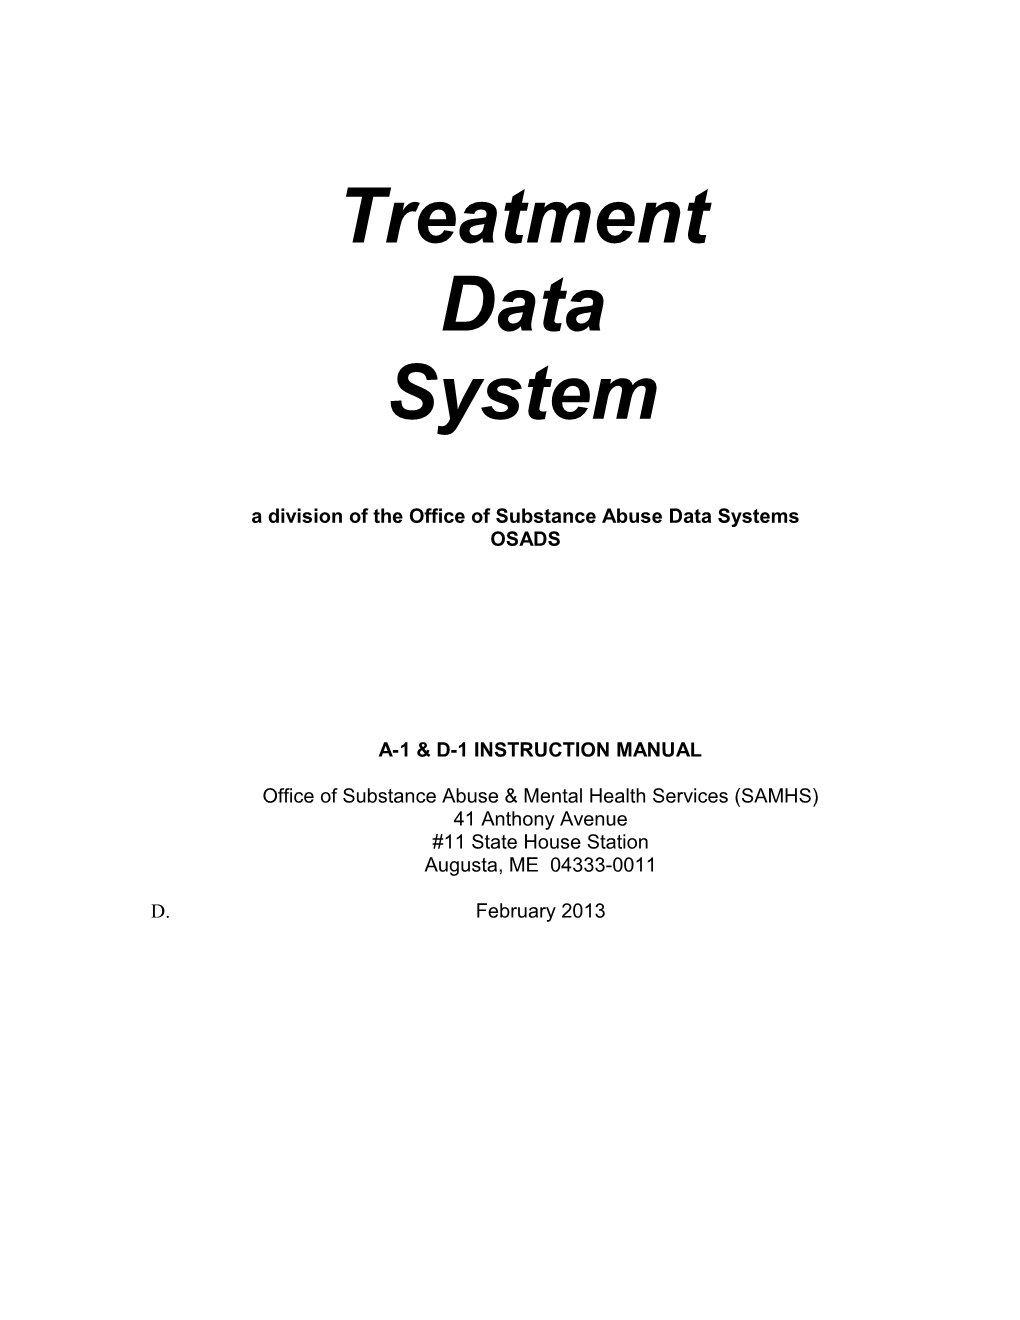 A Division of the Office of Substance Abuse Data Systems